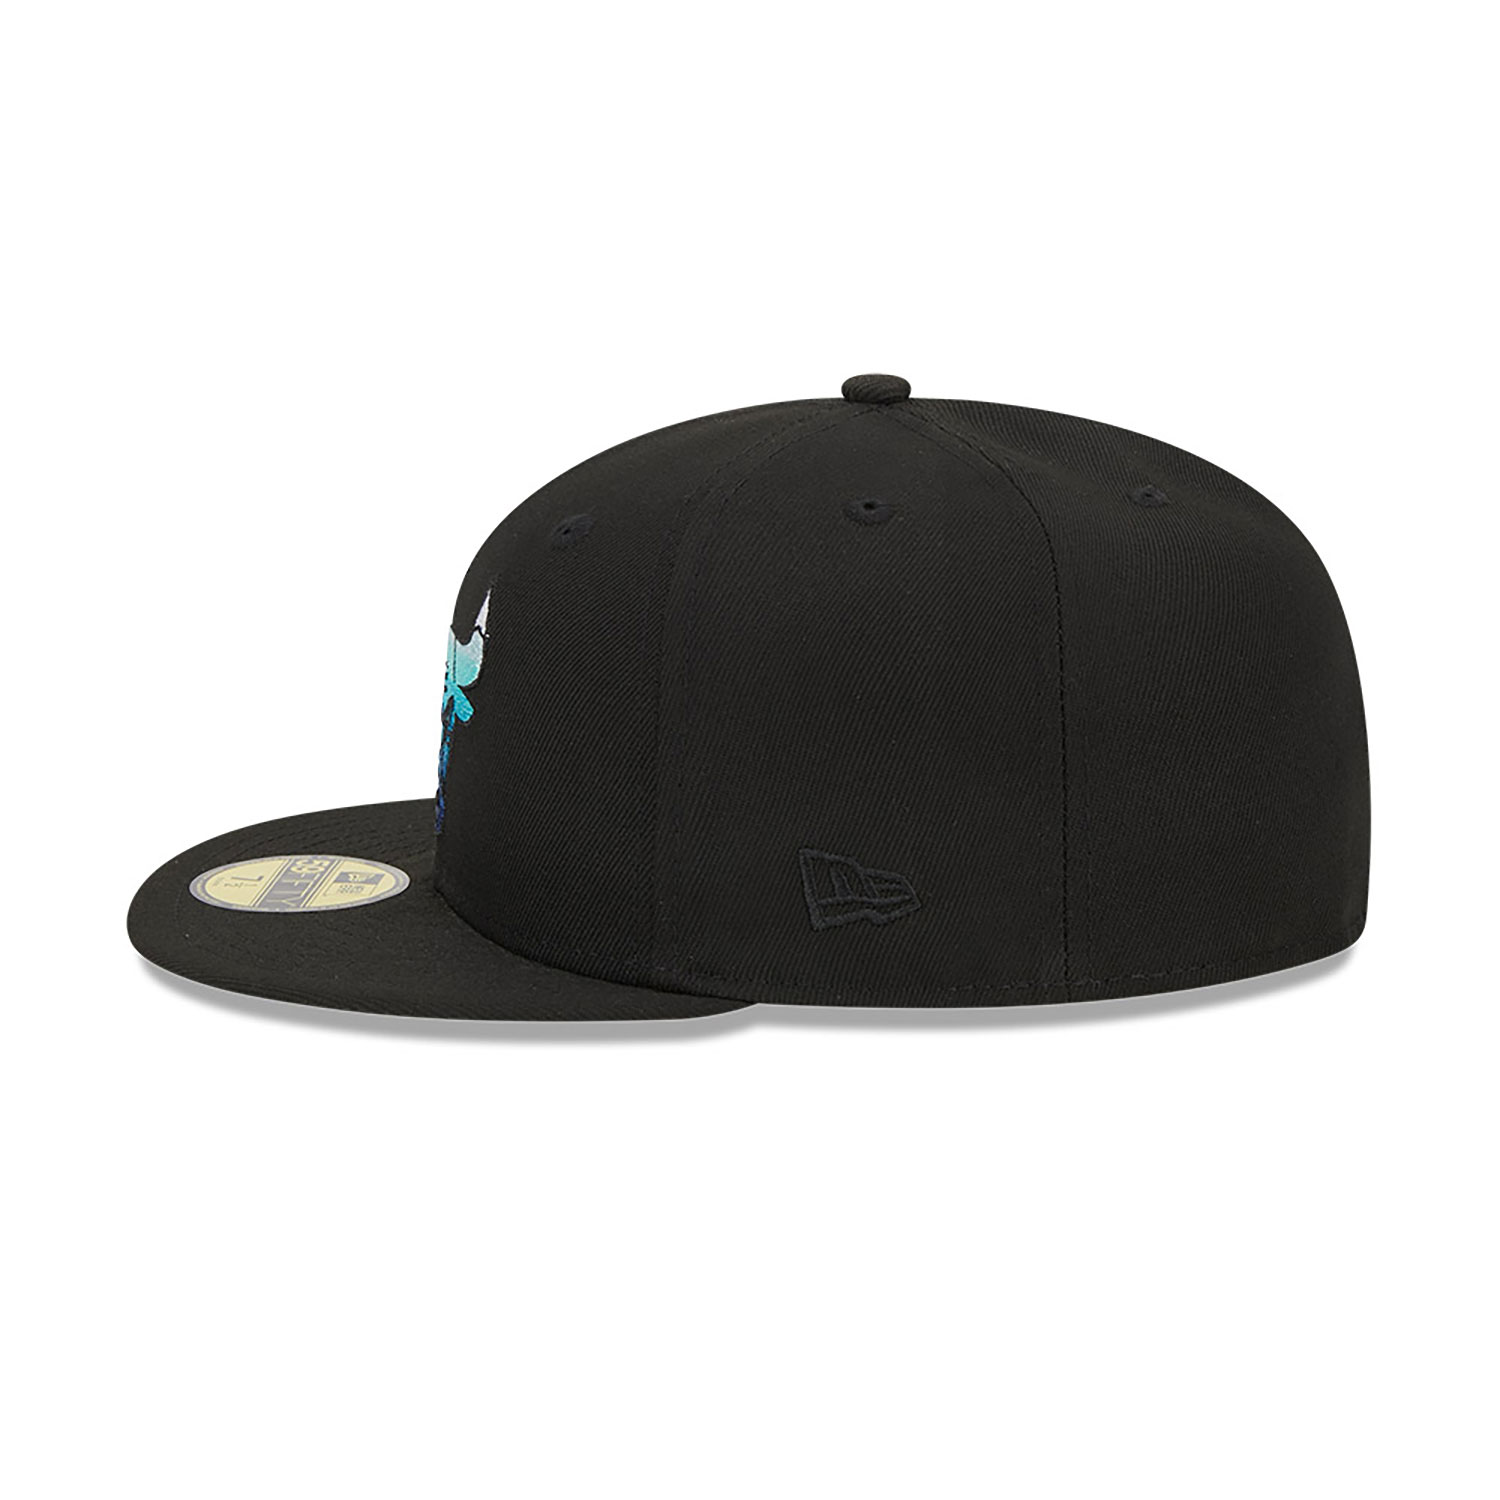 Chicago Bulls Gradient Black 59FIFTY Fitted Cap